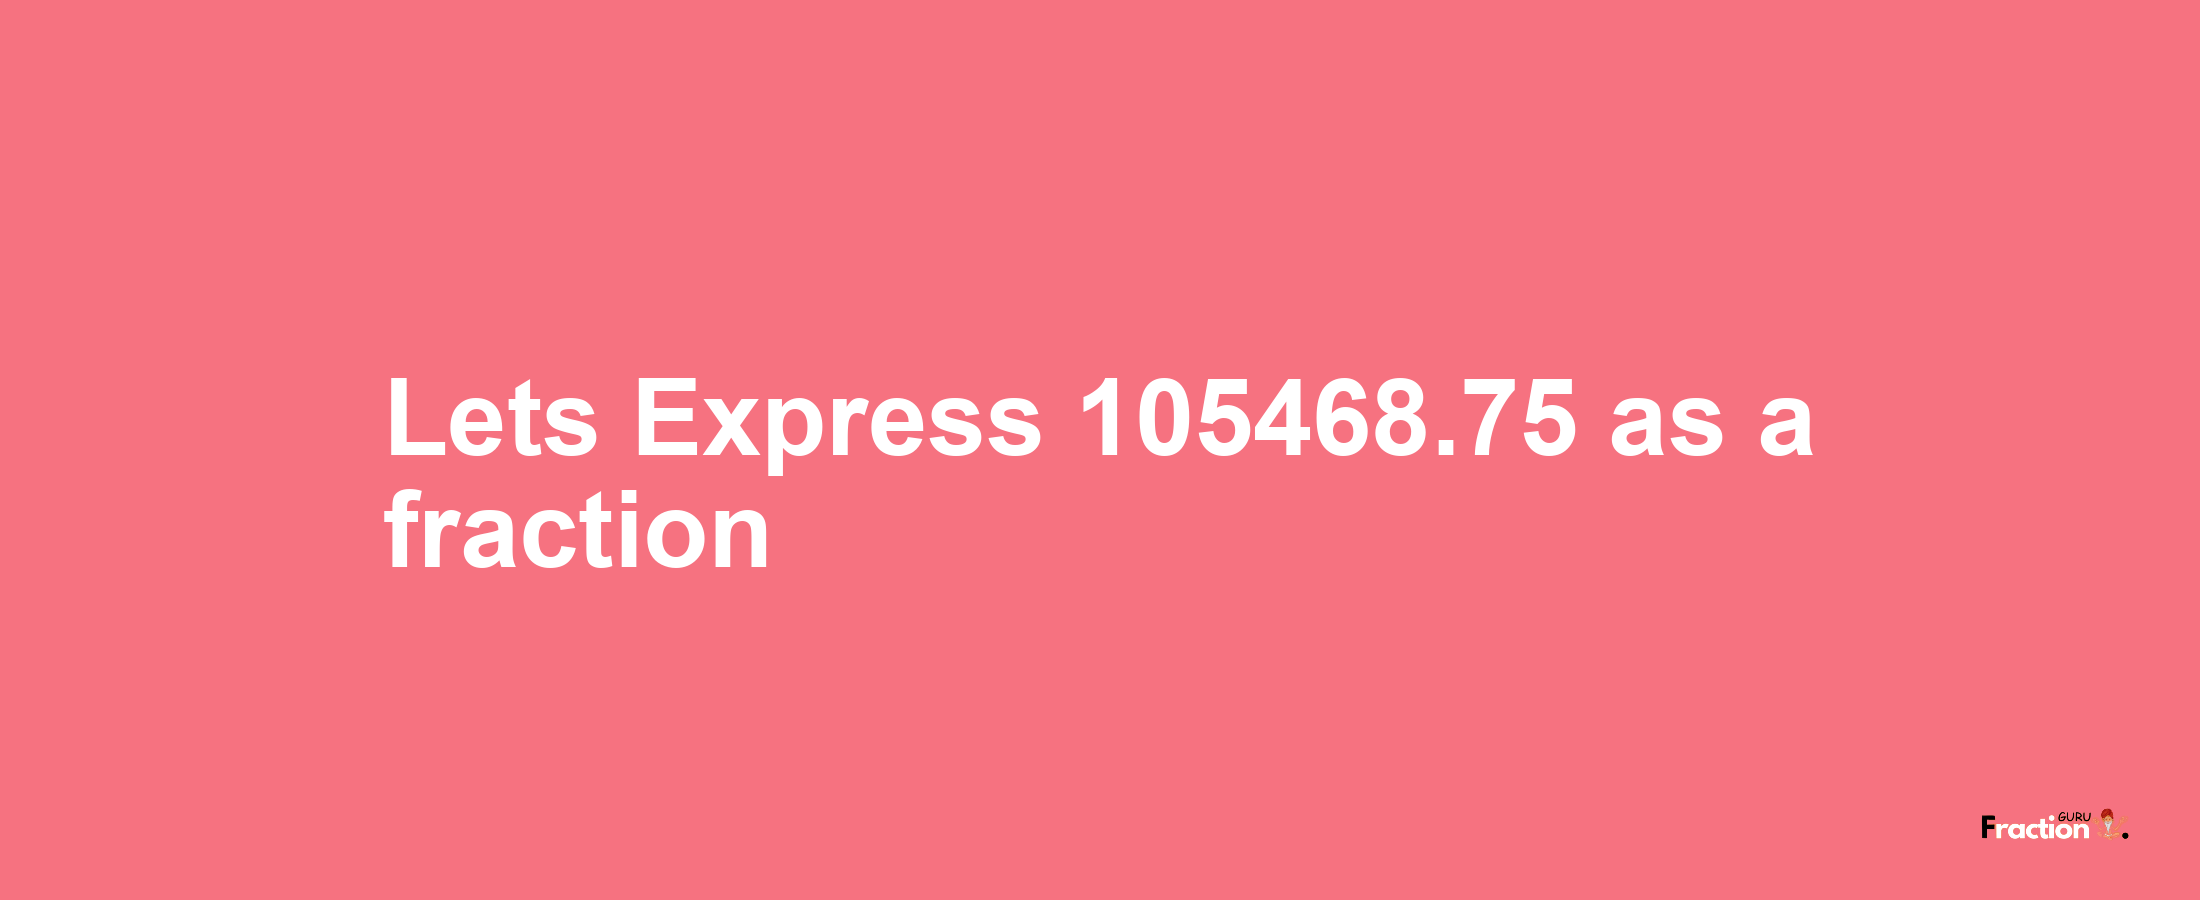 Lets Express 105468.75 as afraction